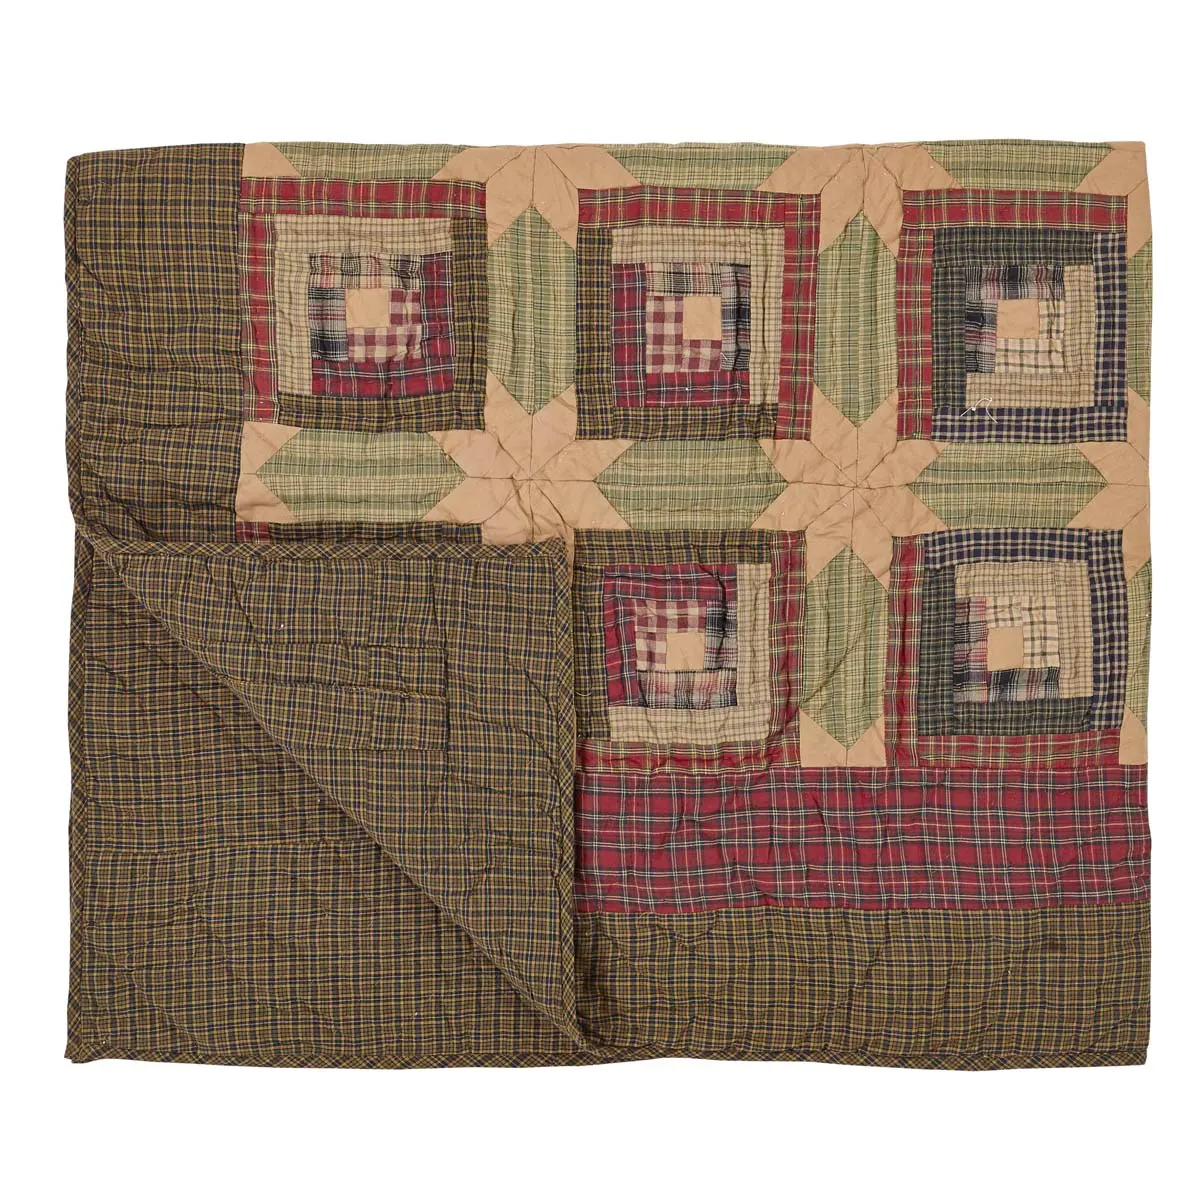 Tea Cabin Throw Quilted 60x50 detail